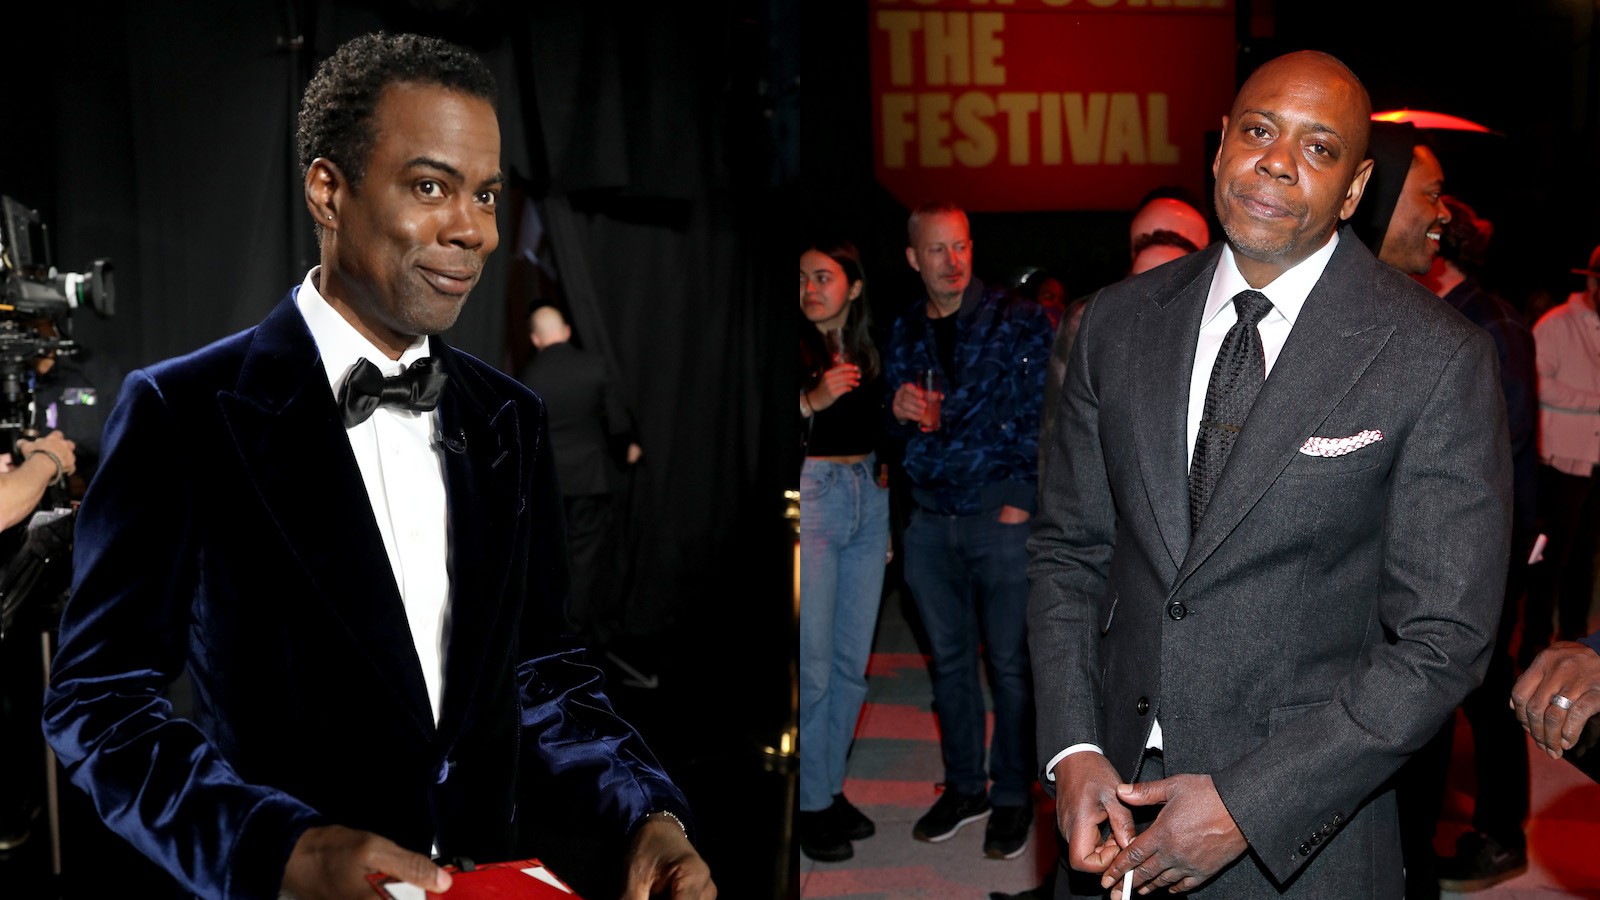 Chris Rock and Dave Chappelle